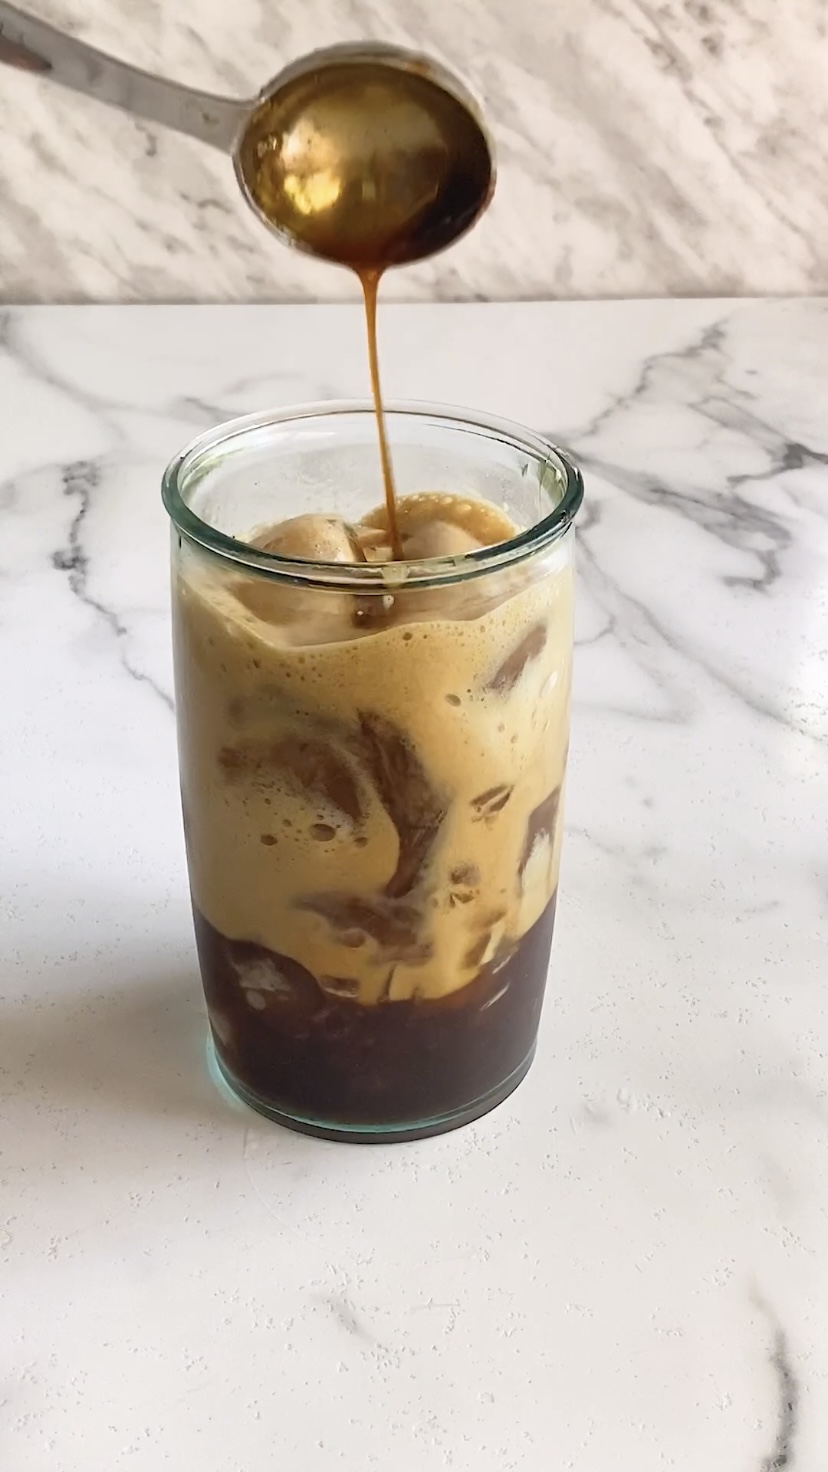 Adding brown sugar syrup to a glass with iced coffee in it.